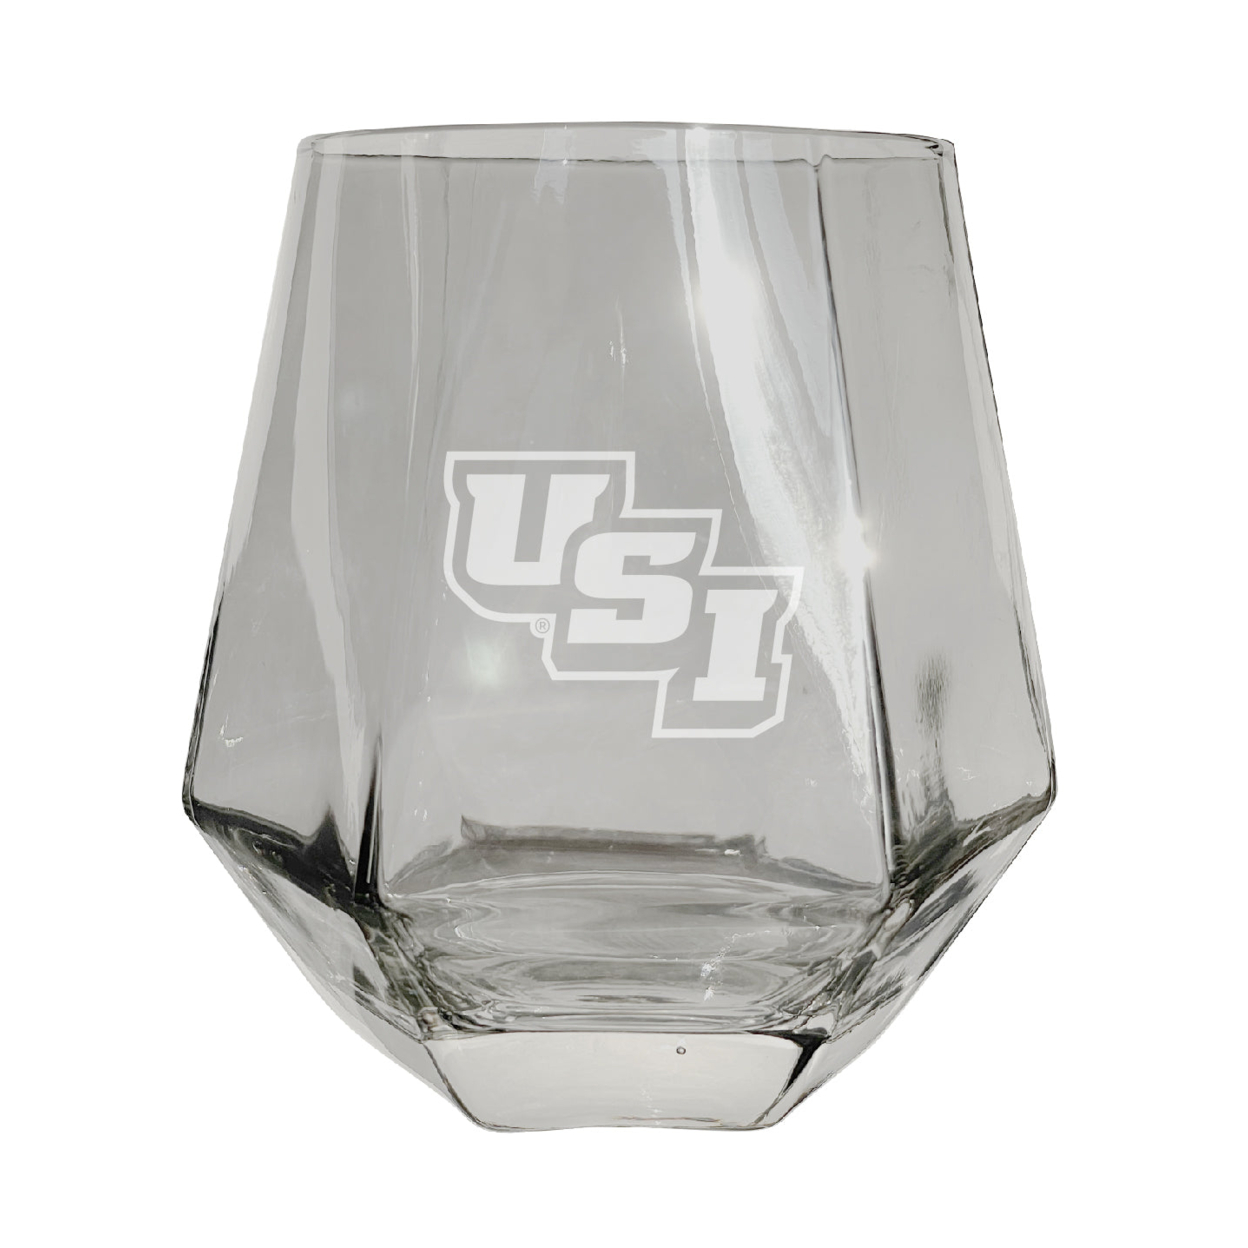 University Of Southern Indiana Etched Diamond Cut Stemless 10 Ounce Wine Glass Clear